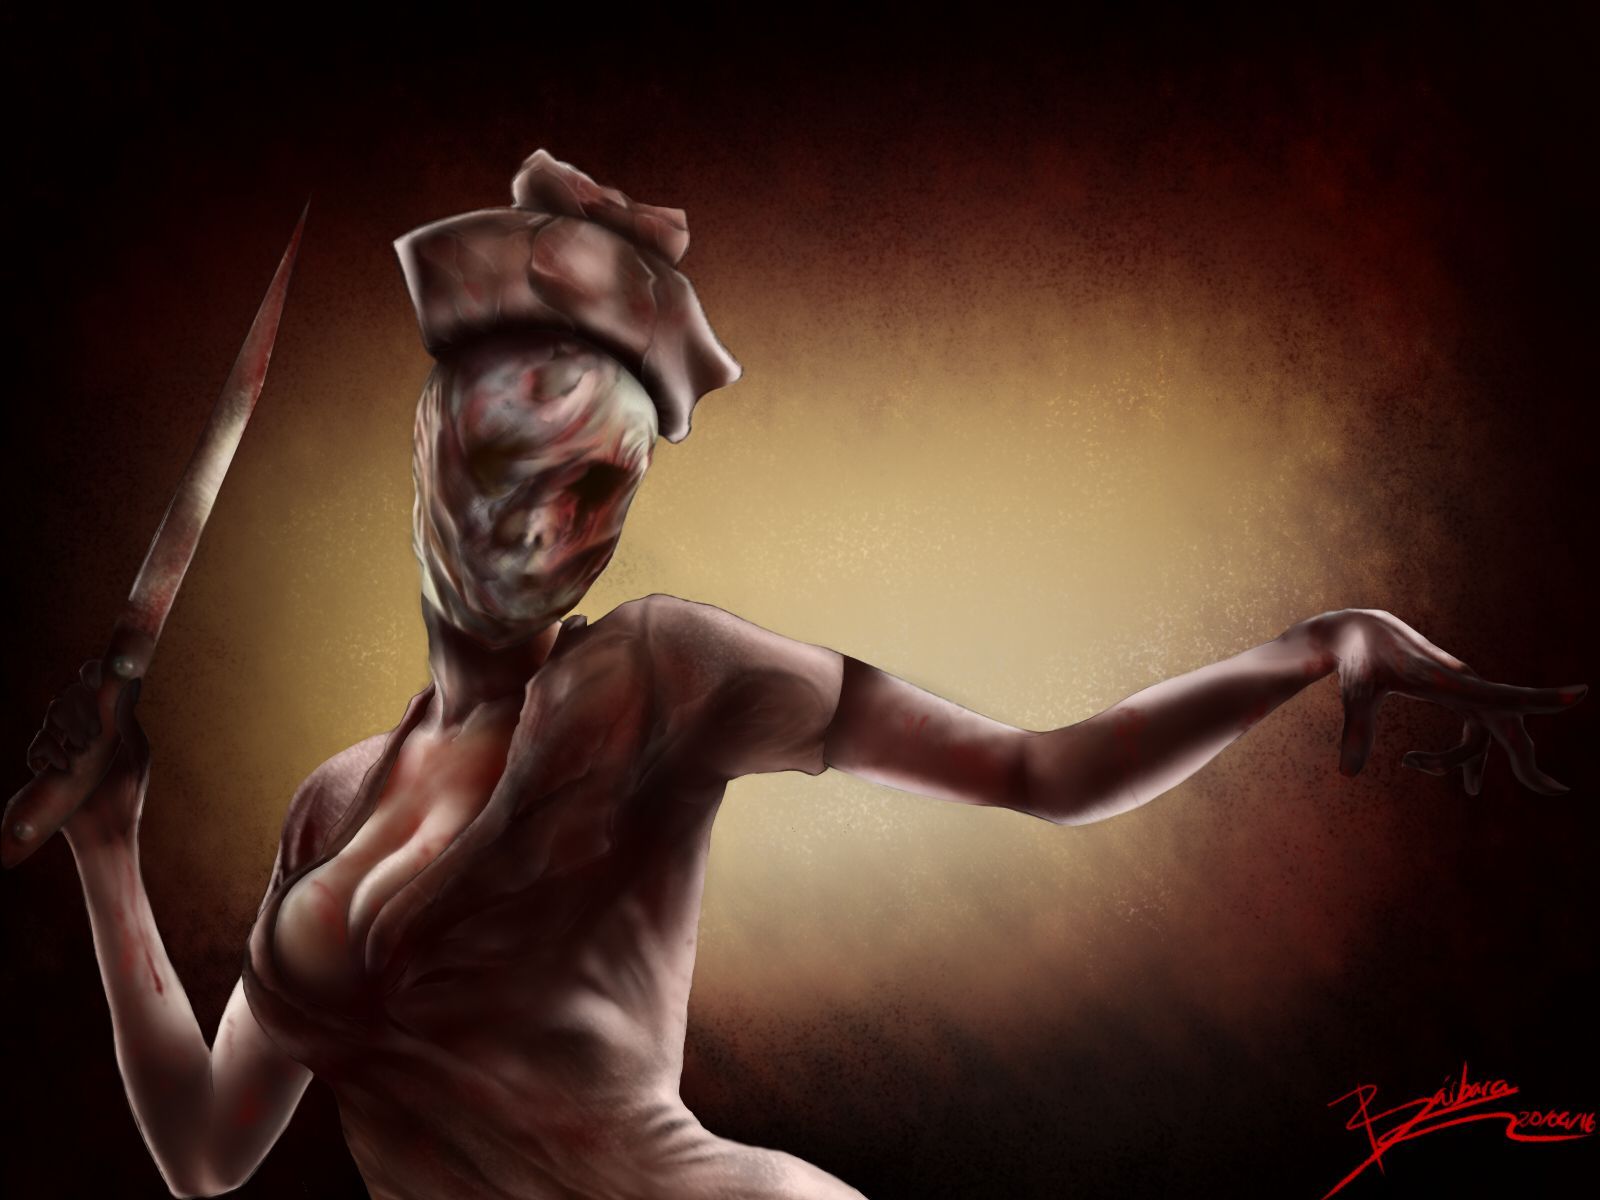 Betty B. reccomend Silent hill naked nurse